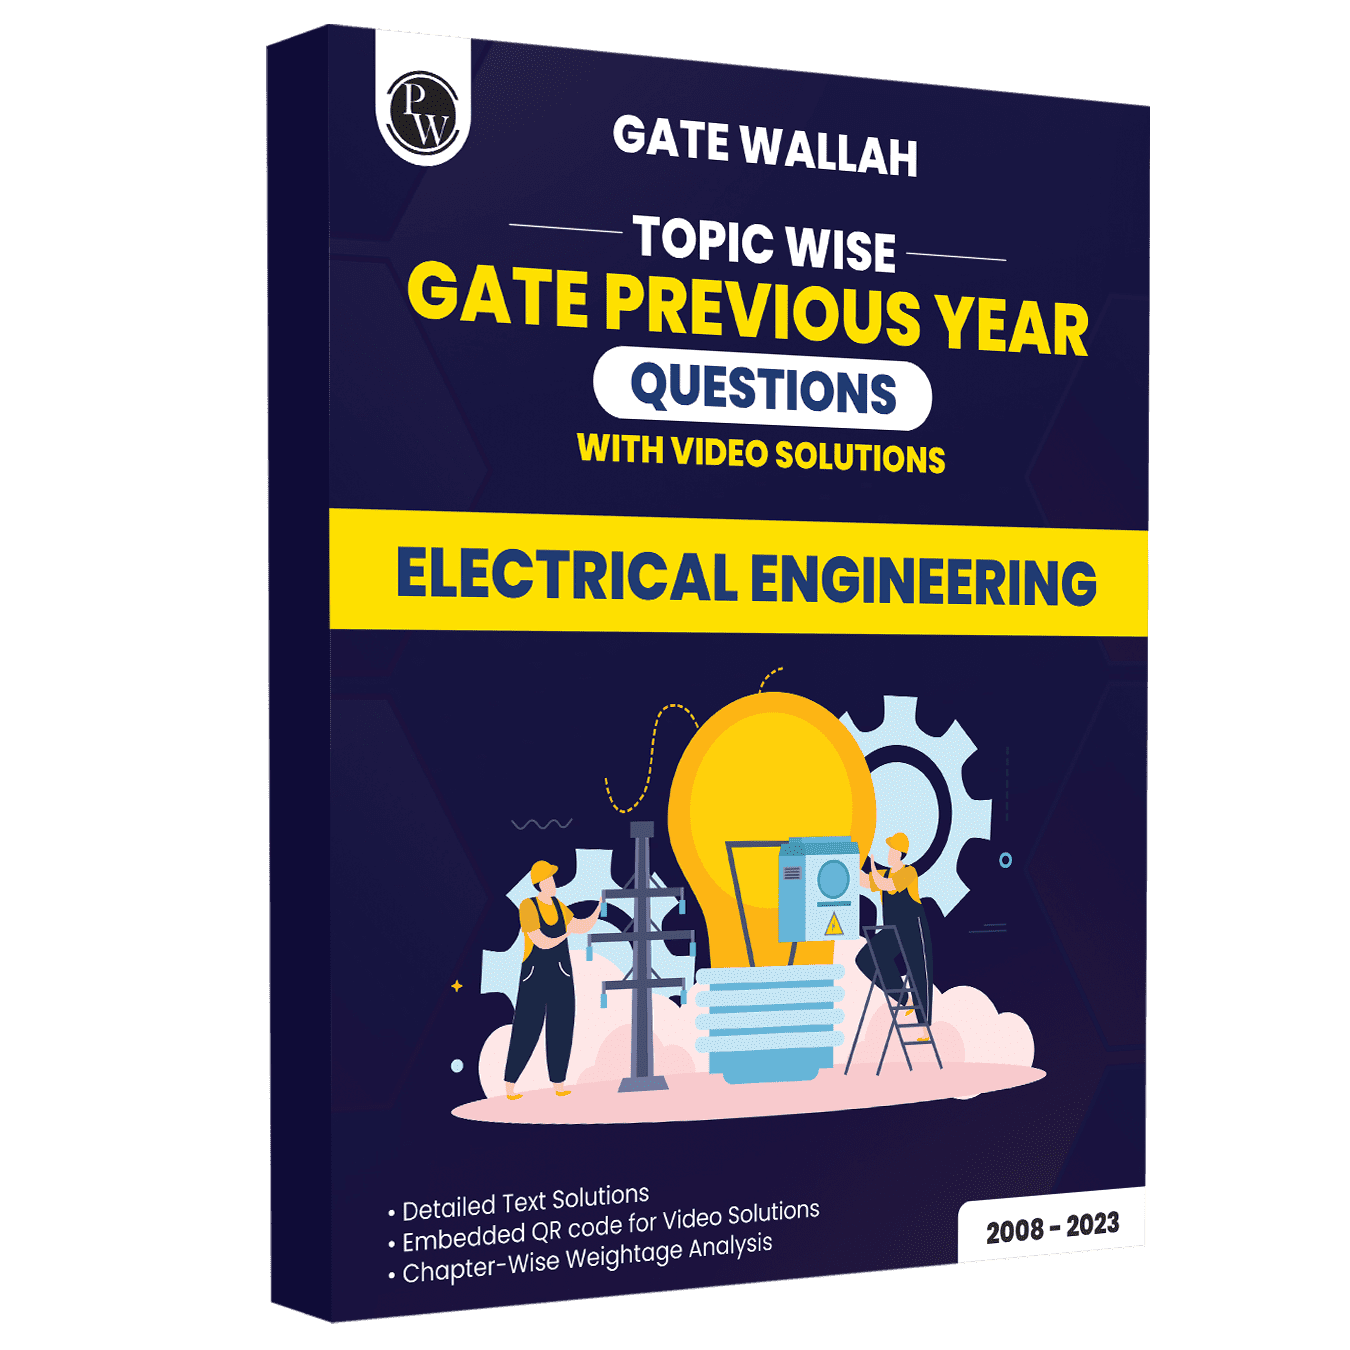 GATE Wallah Topicwise Previous Year Questions-Electrical Engineering